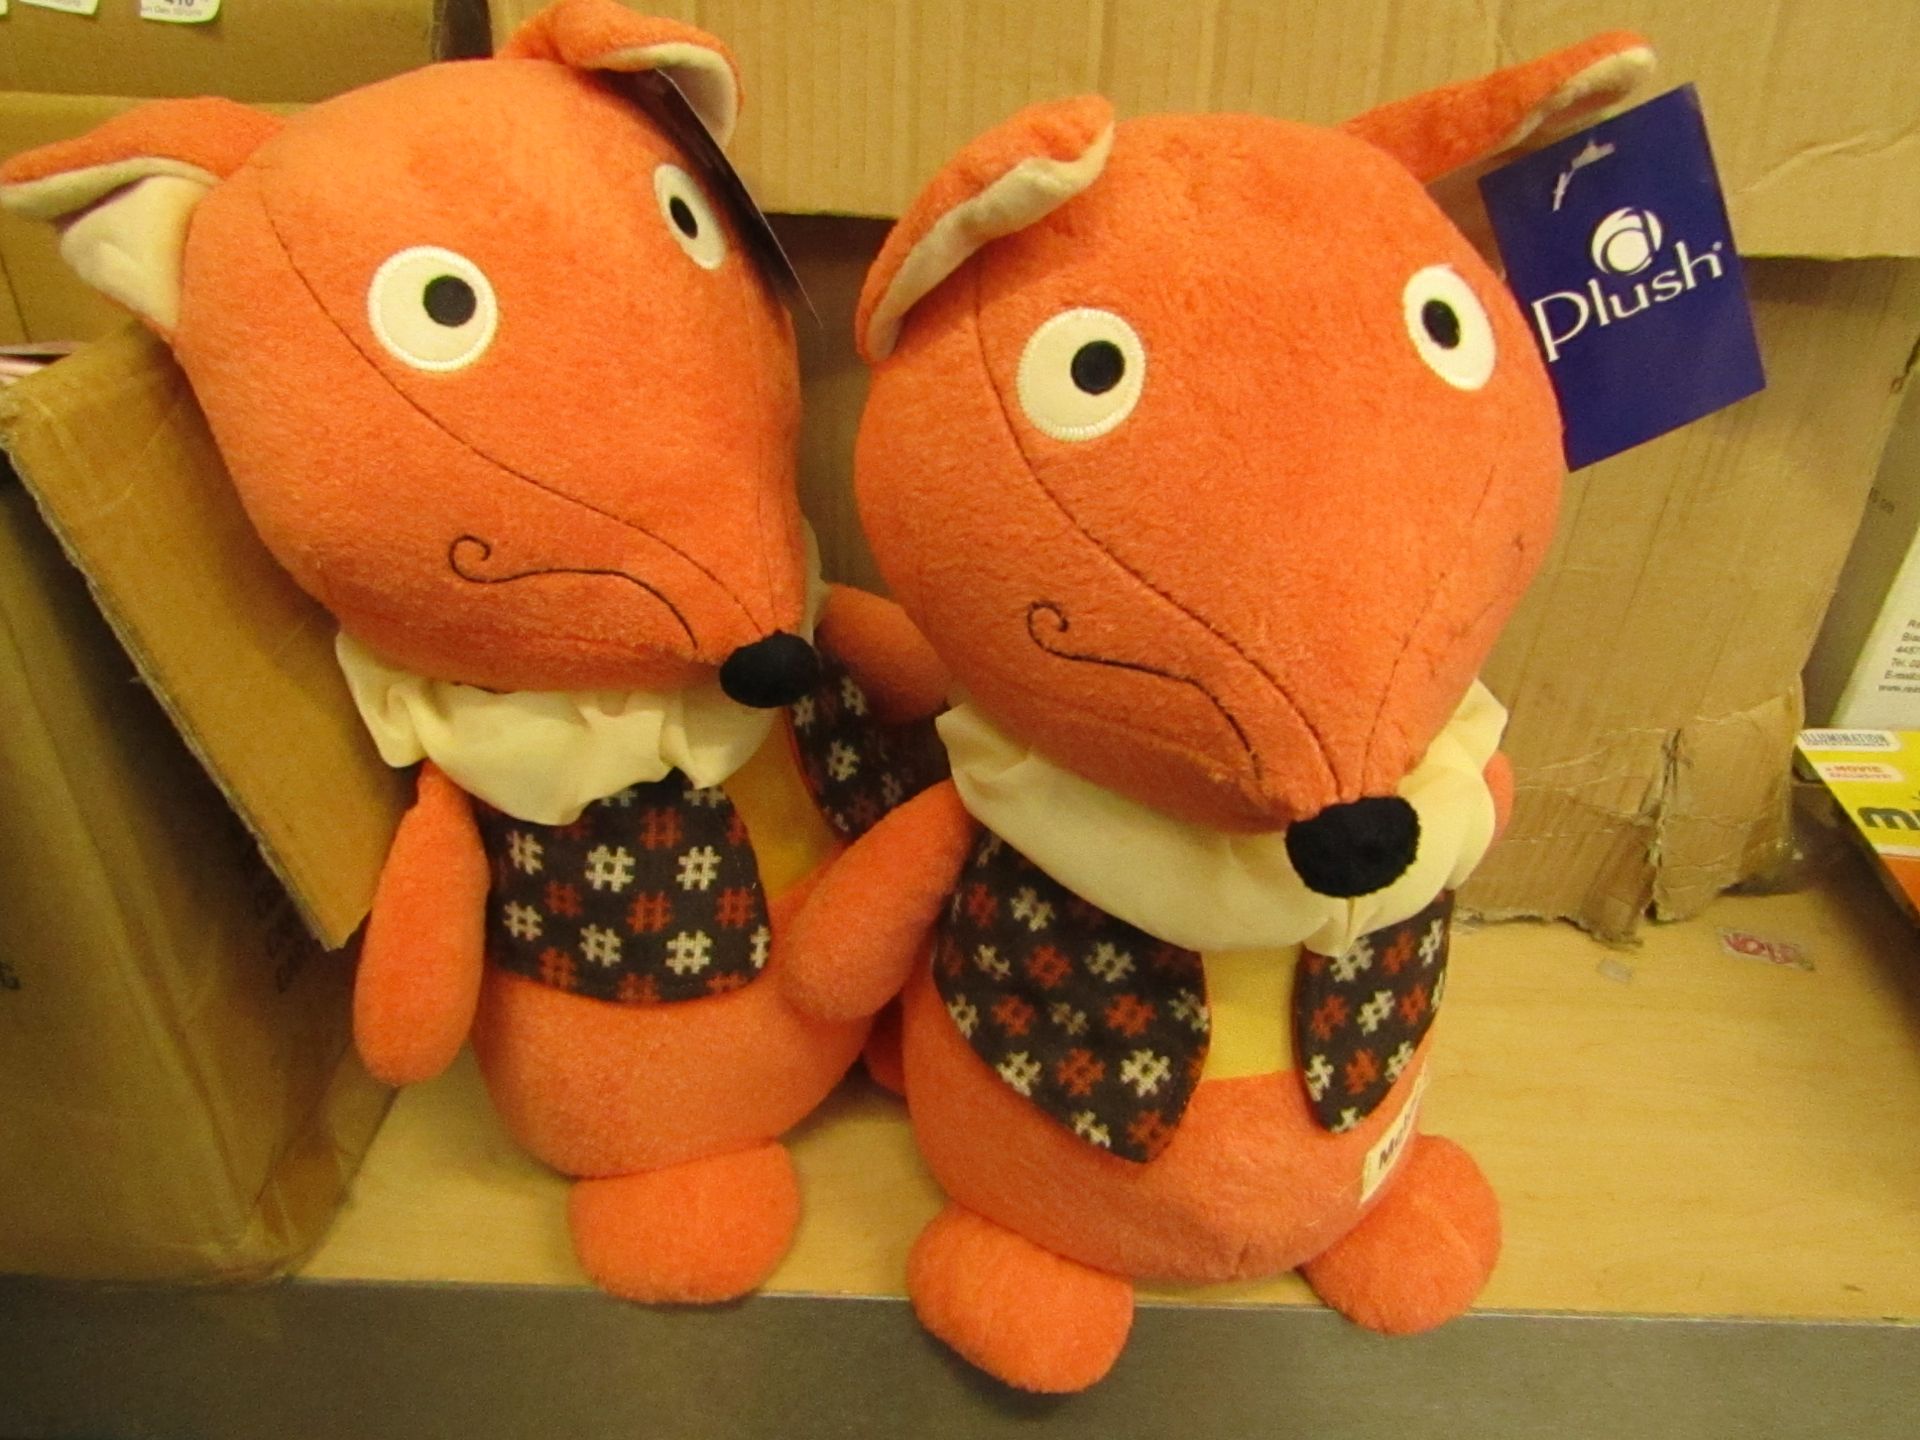 2 x Plush Fox Teddies. New with tags. Ideal Stocking fillers.